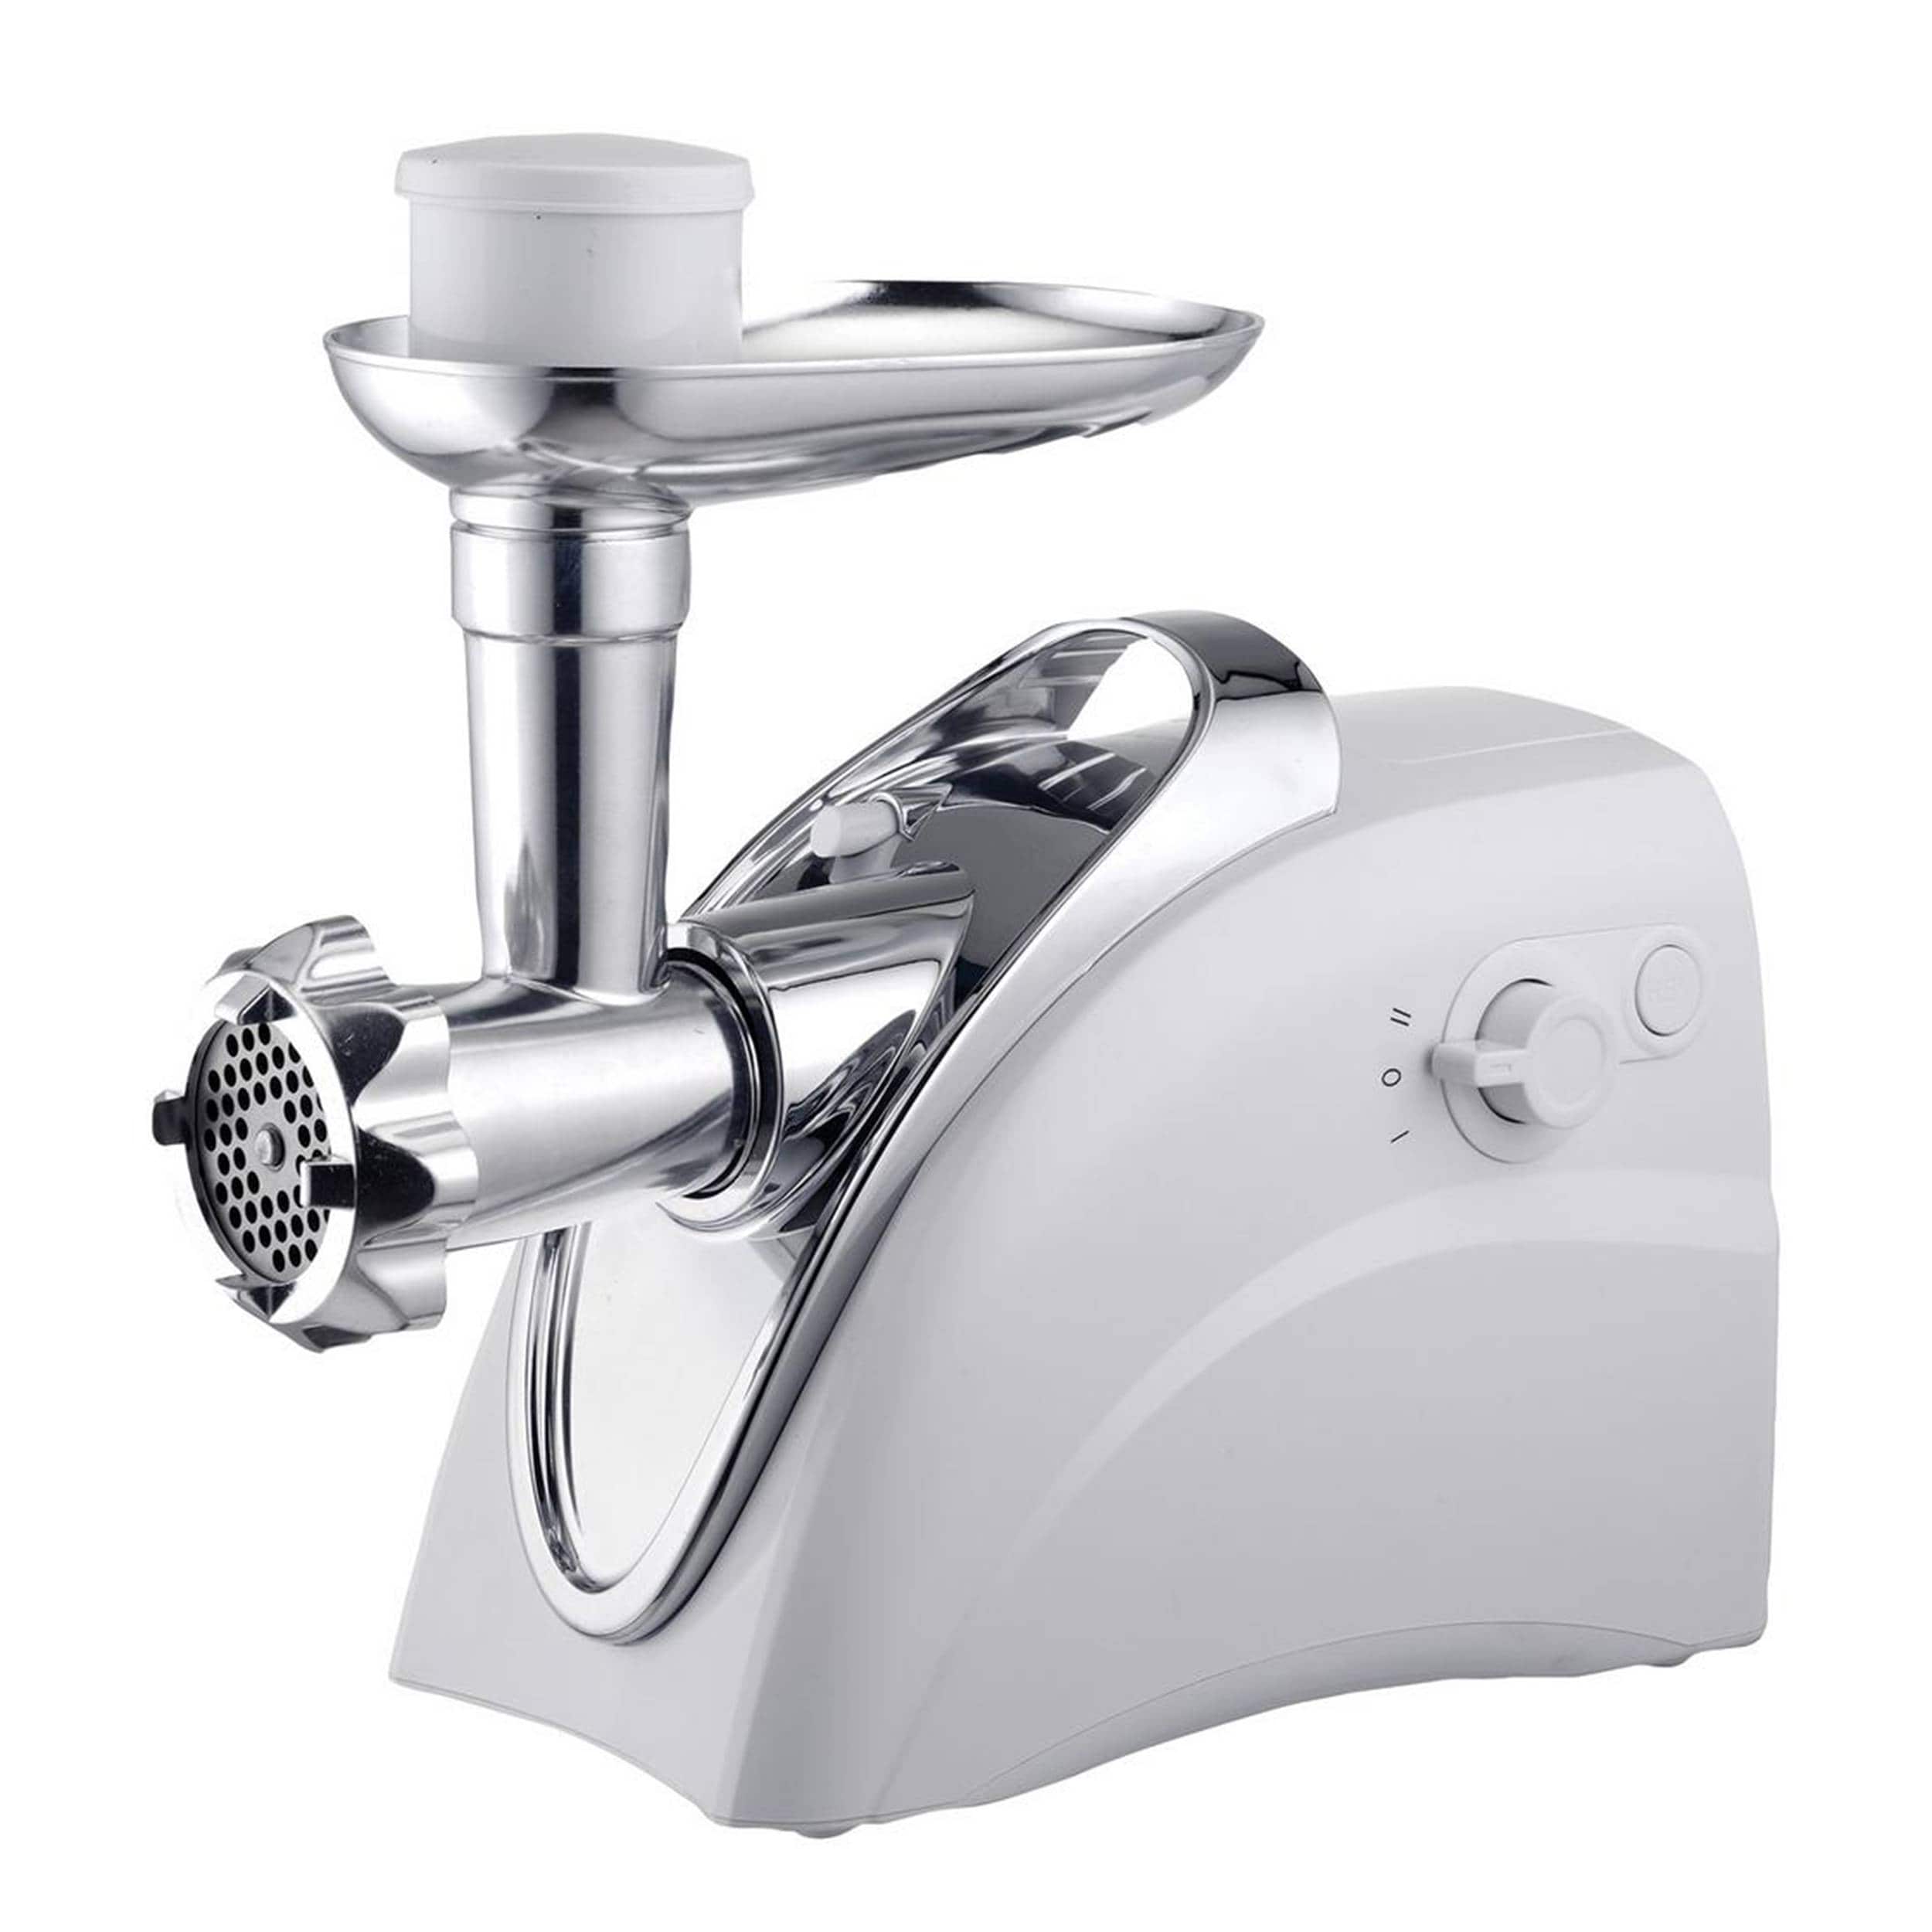 Avanti Gray Commercial/Residential Meat Grinder - Rugged Cast Metal  Construction, Powerful Motor, High Torque Gear Drive System in the Meat  Grinders department at